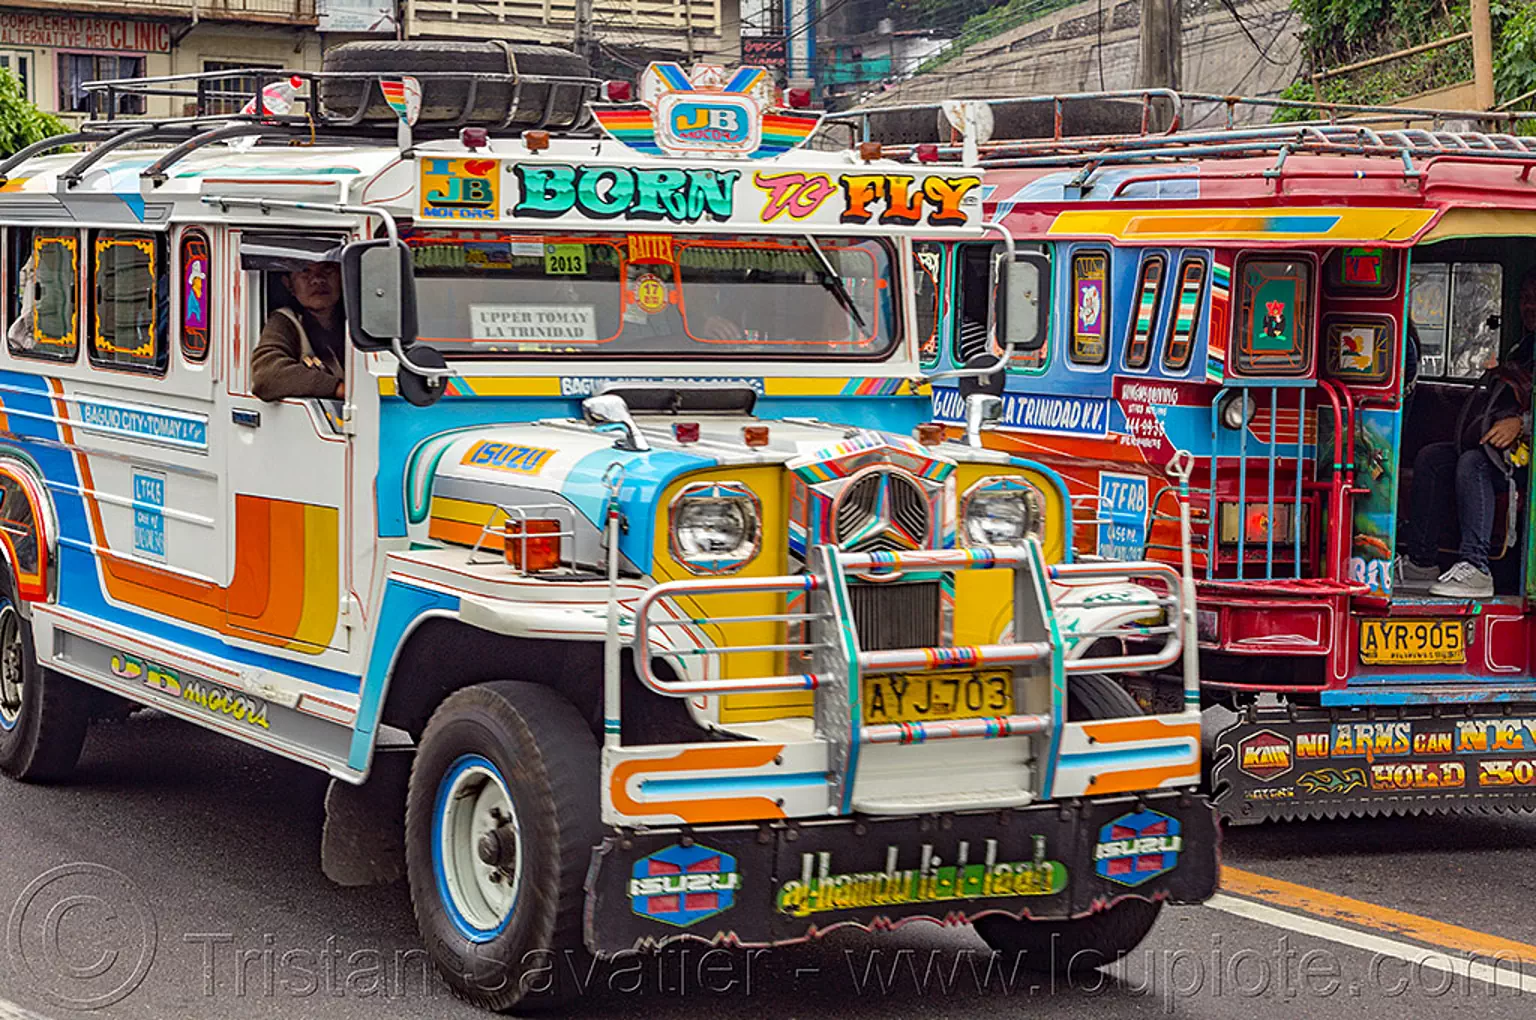 jeepney - born to fly (philippines), baguio, colorful, decorated, front grill, jeepney, painted, philippines, road, truck